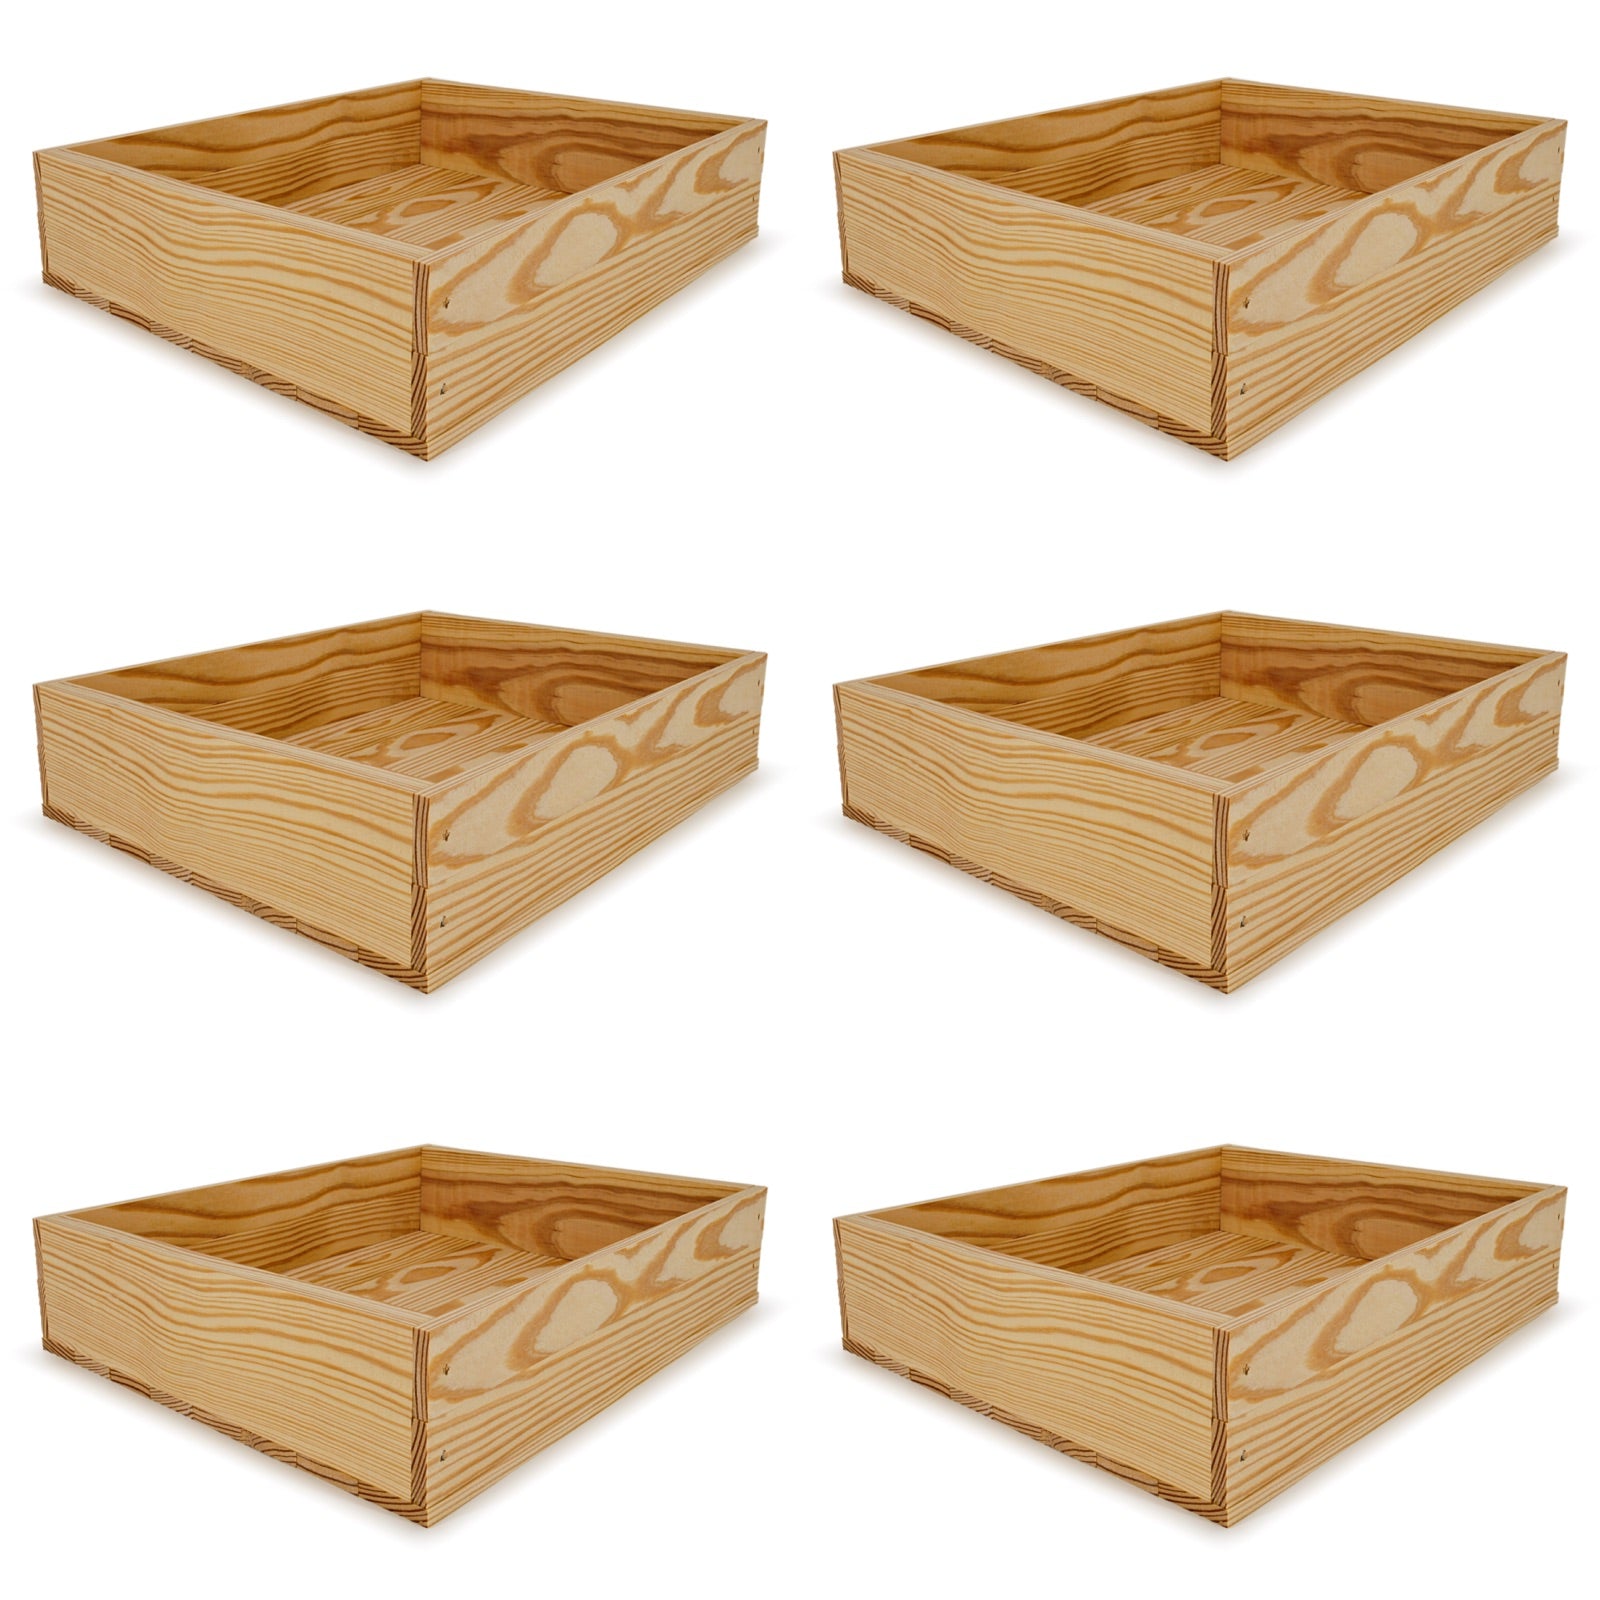 Natural Wooden Crate Storage Box with Lid - Small 7in